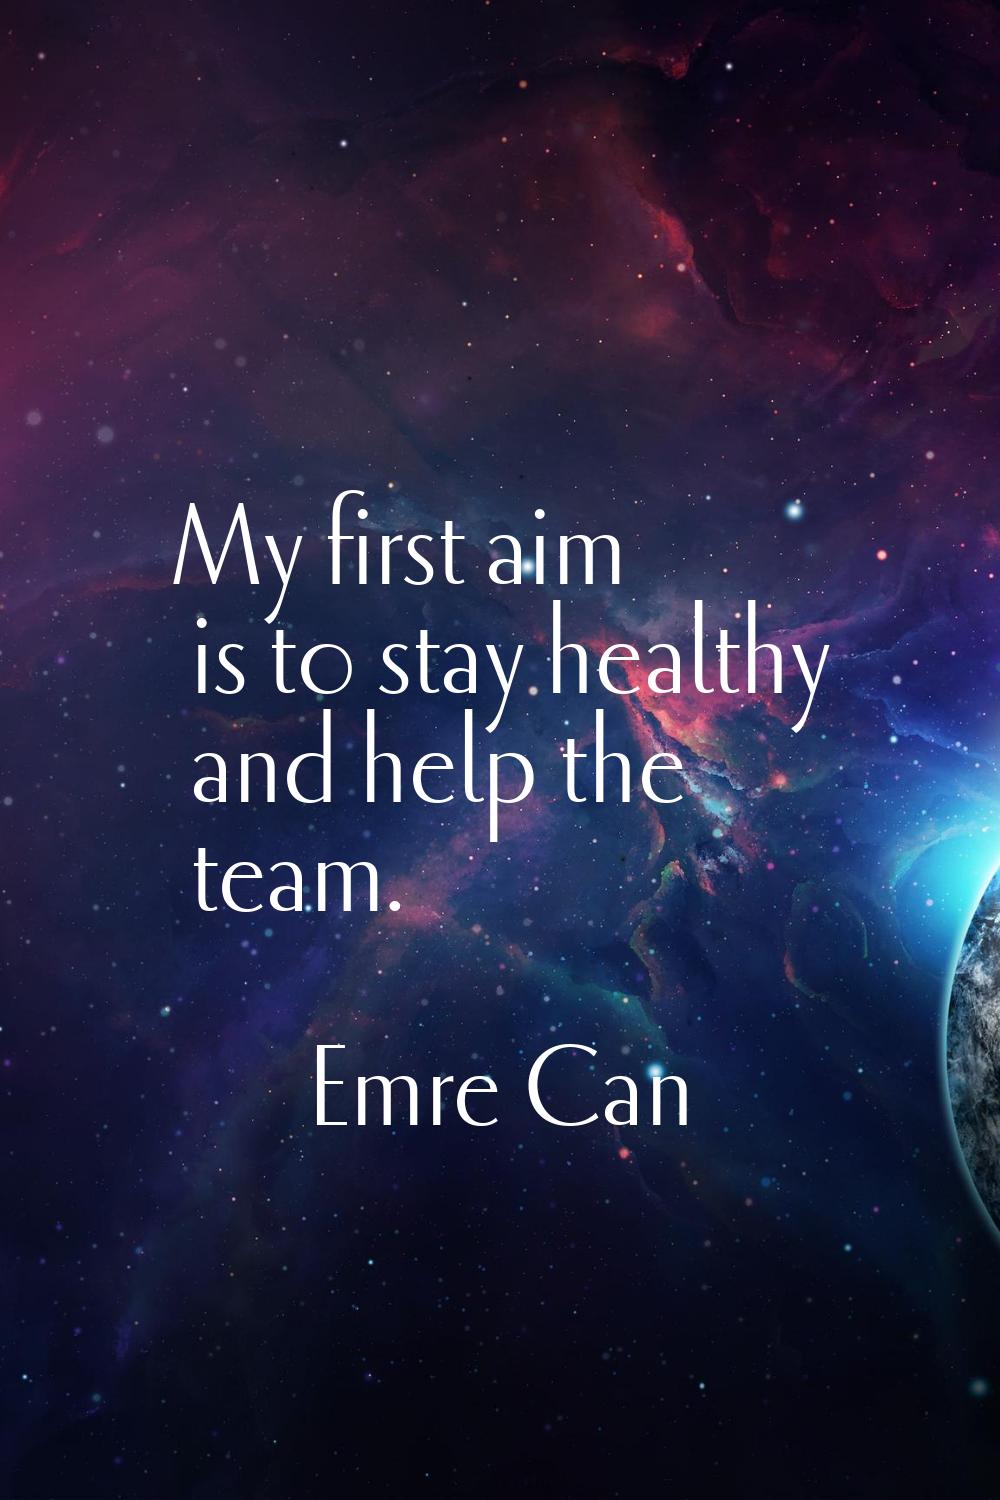 My first aim is to stay healthy and help the team.